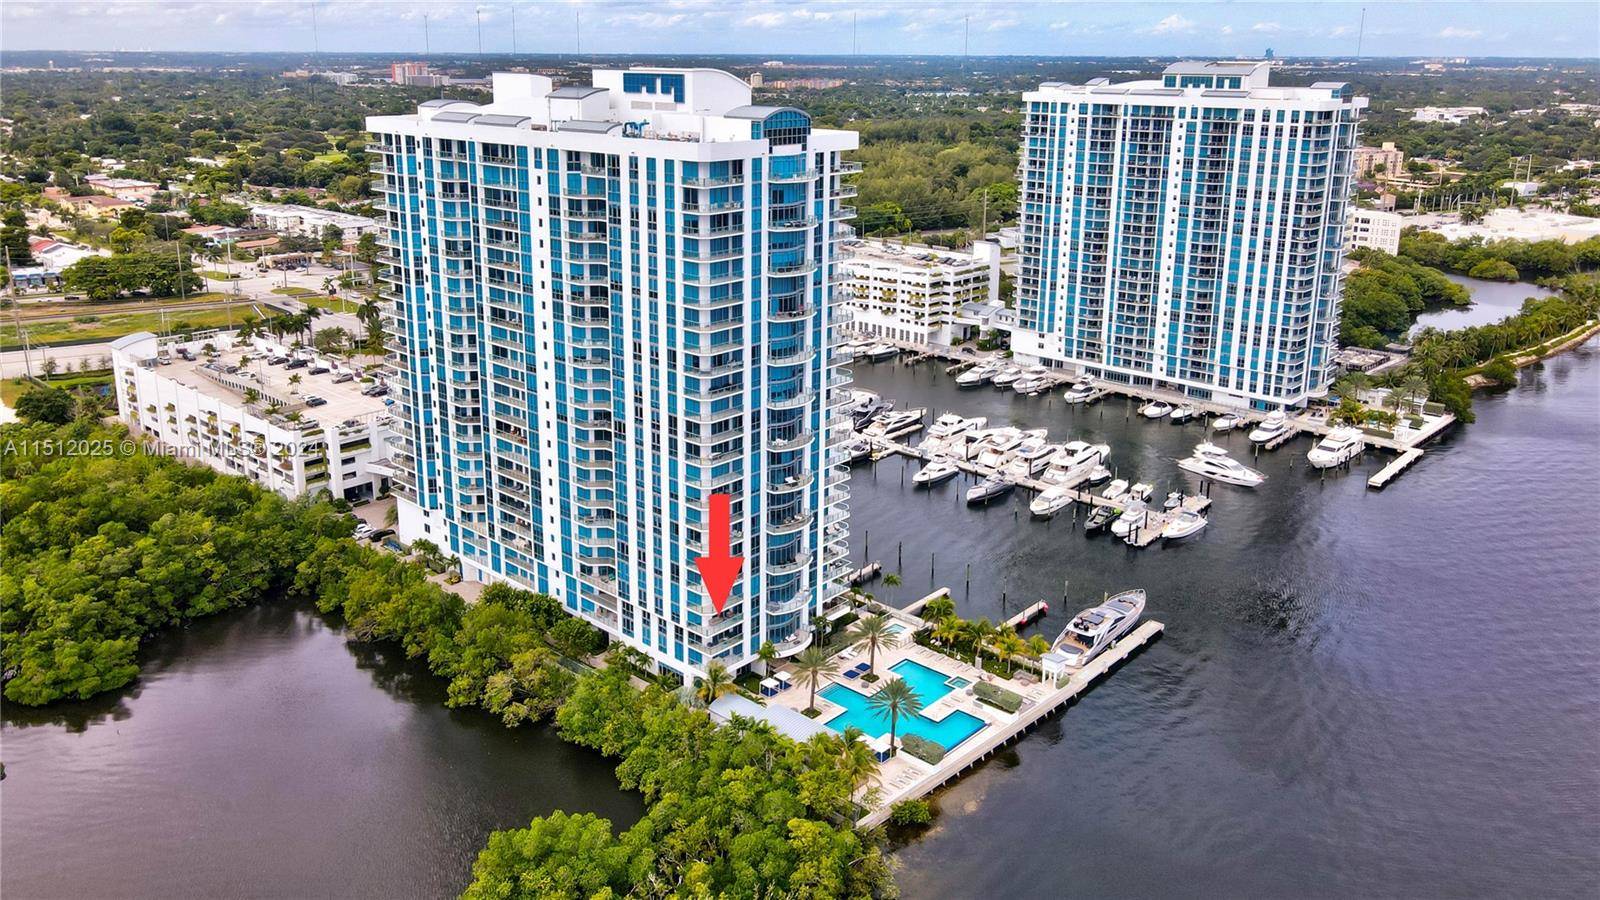 The Reserve at Marina Palms is located on its own peninsula, Marina Palms south offers both views over the lake on one side and a nature preserve on the other, ...